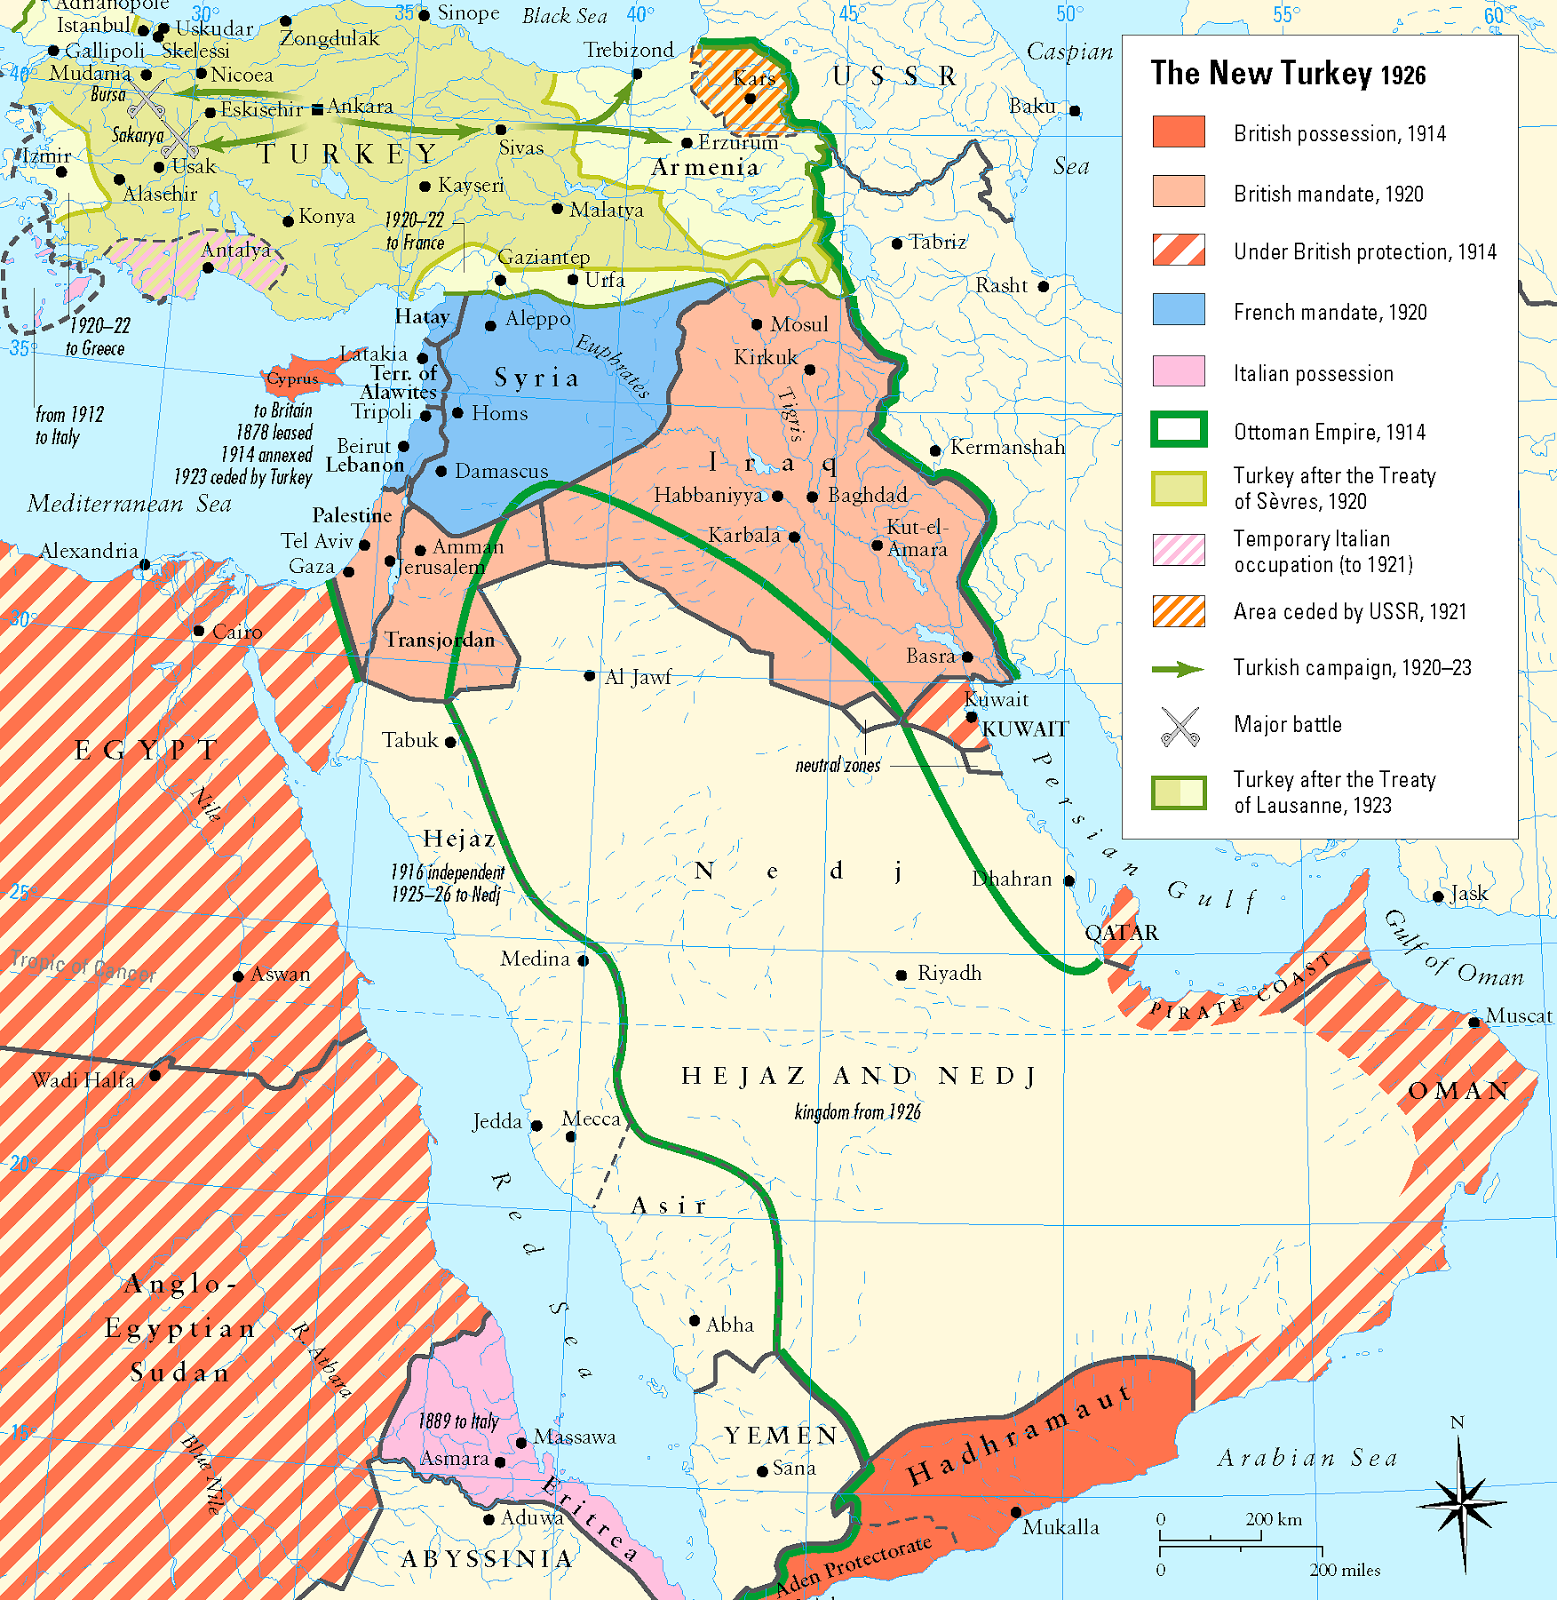 Post-War Middle East